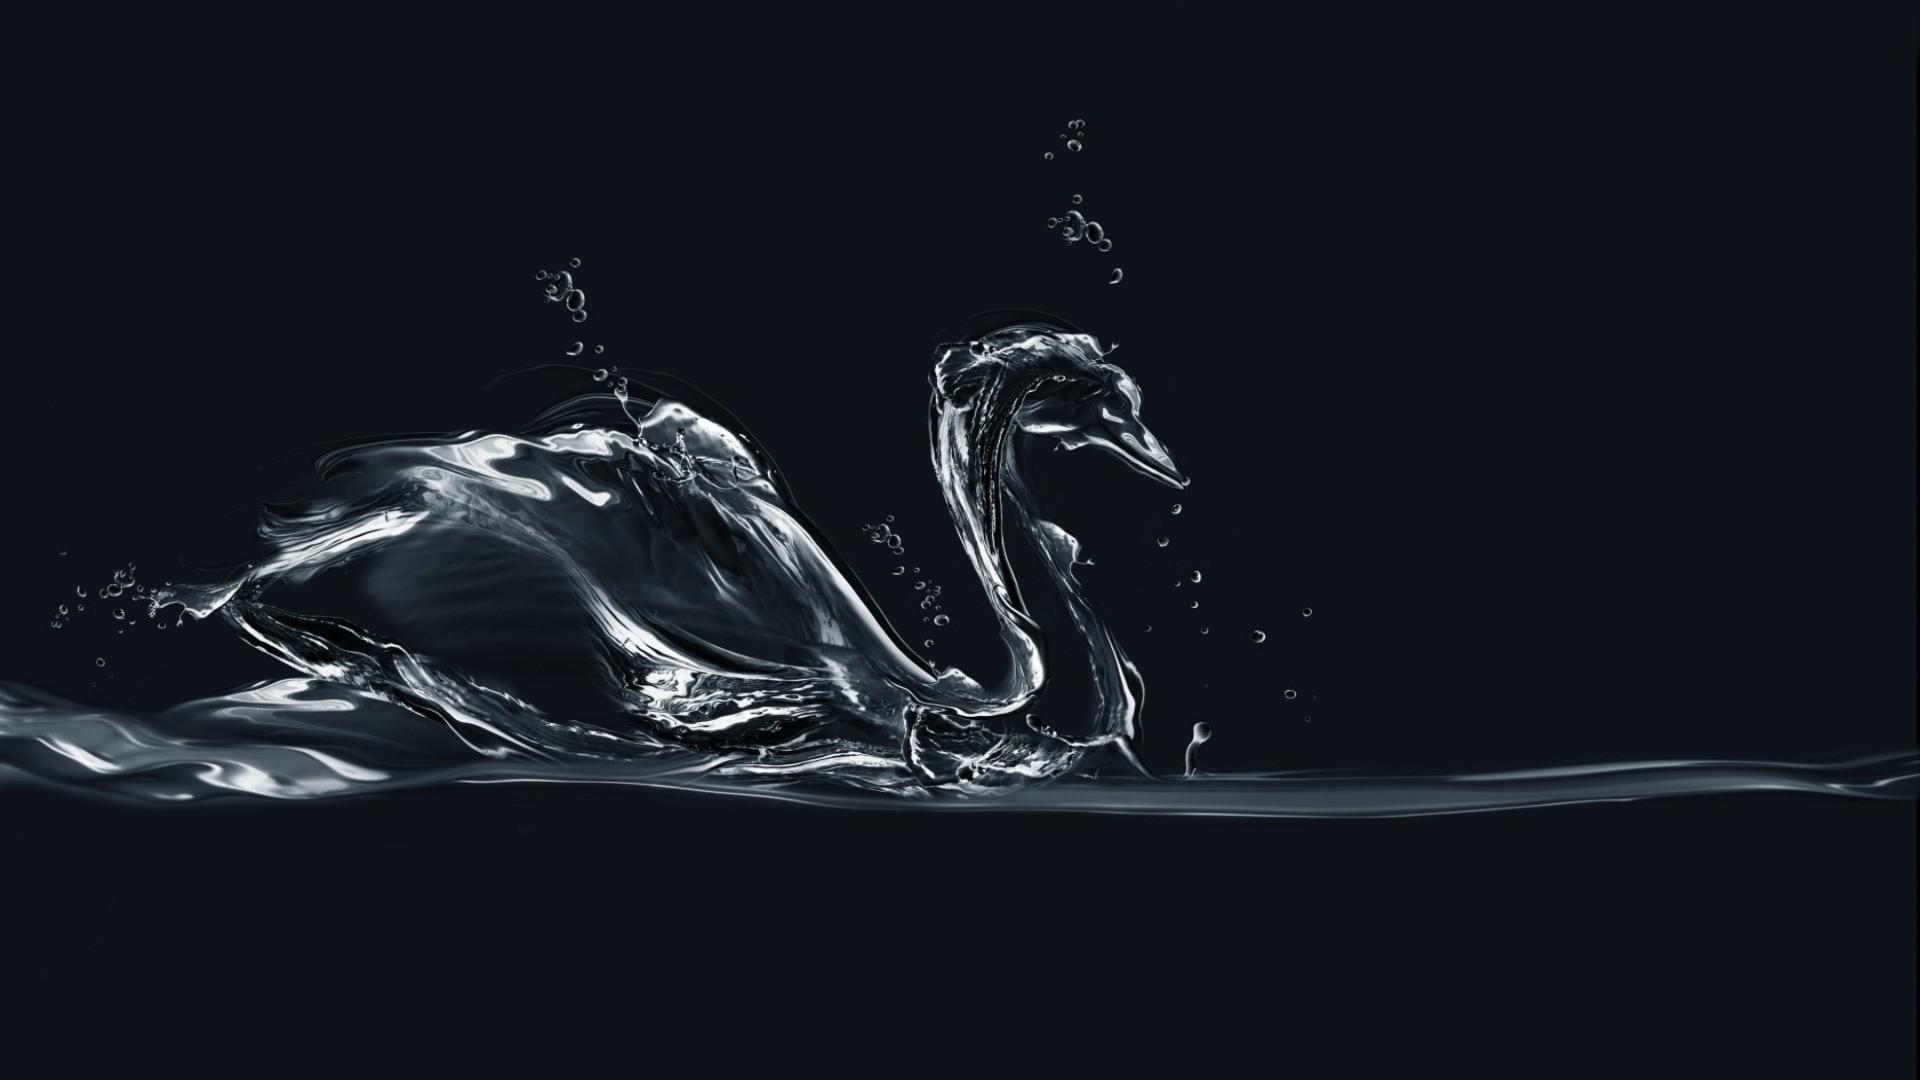 abstract and graphics motion splash drop purity action drink wet smooth underwater liquid wave cold bubble clean water droplet food side view